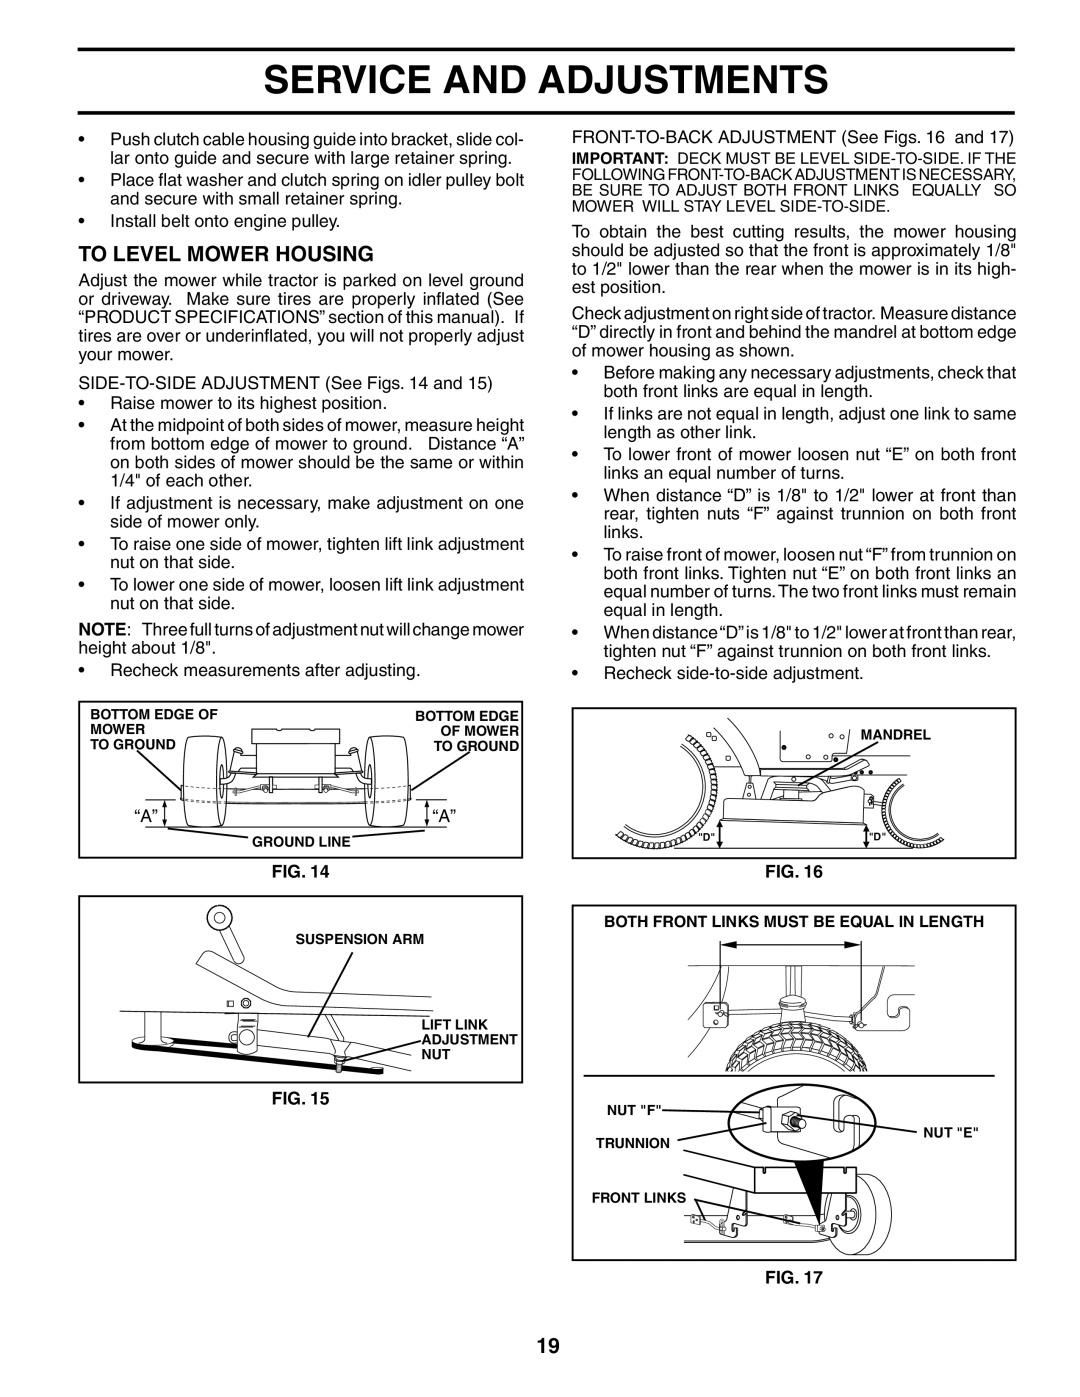 Poulan 187007 manual To Level Mower Housing, FRONT-TO-BACK Adjustment See Figs 